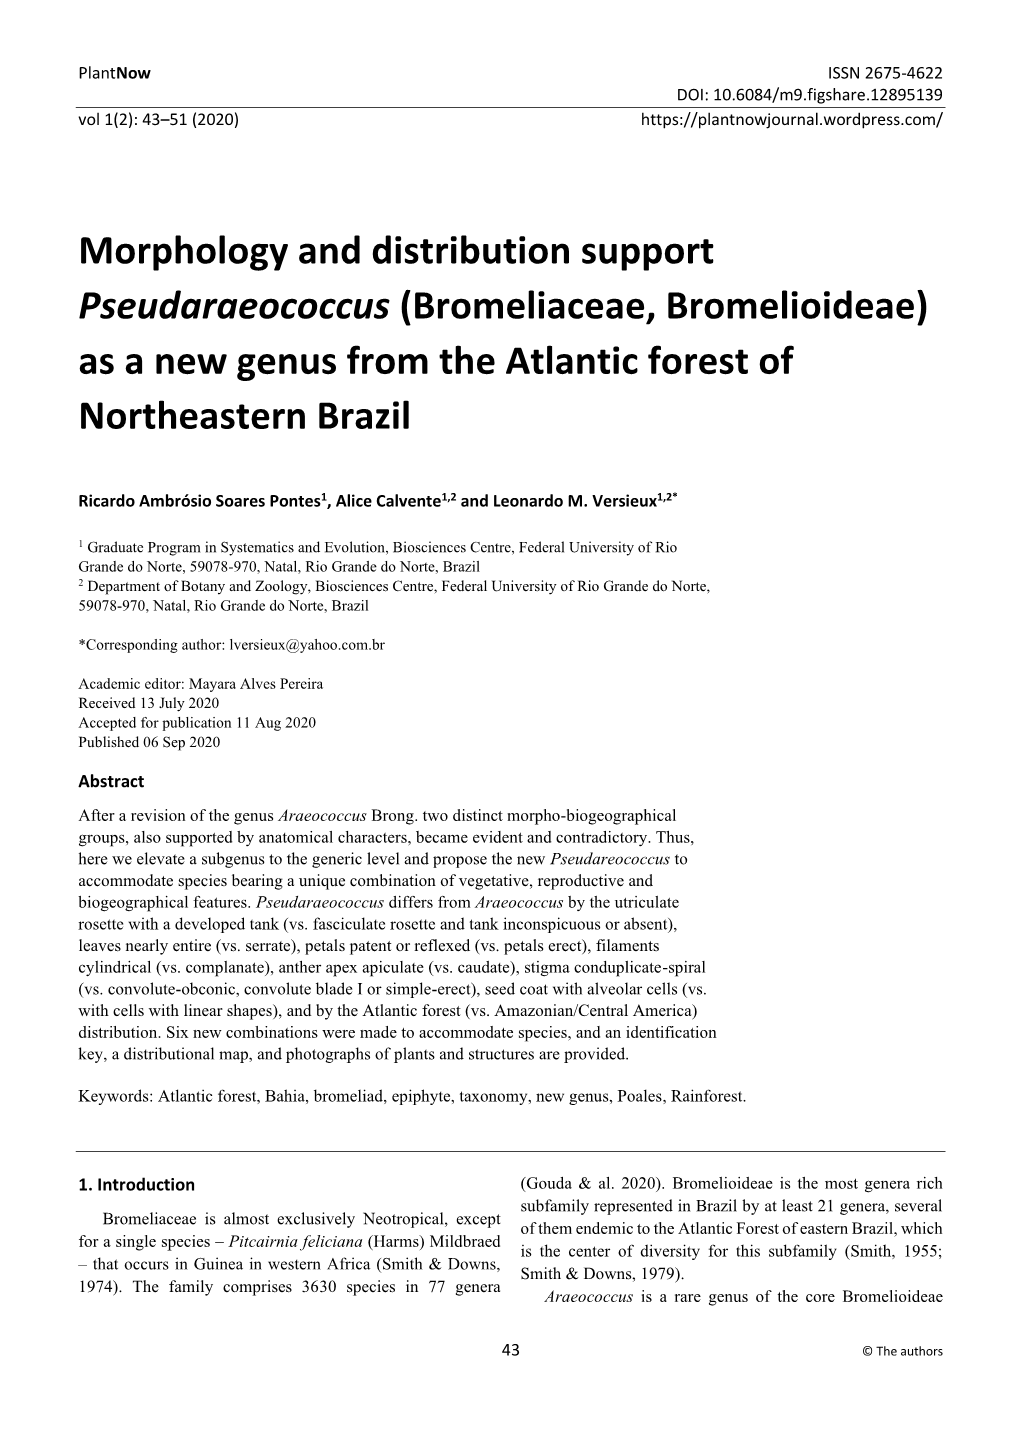 Morphology and Distribution Support Pseudaraeococcus (Bromeliaceae, Bromelioideae) As a New Genus from the Atlantic Forest of Northeastern Brazil